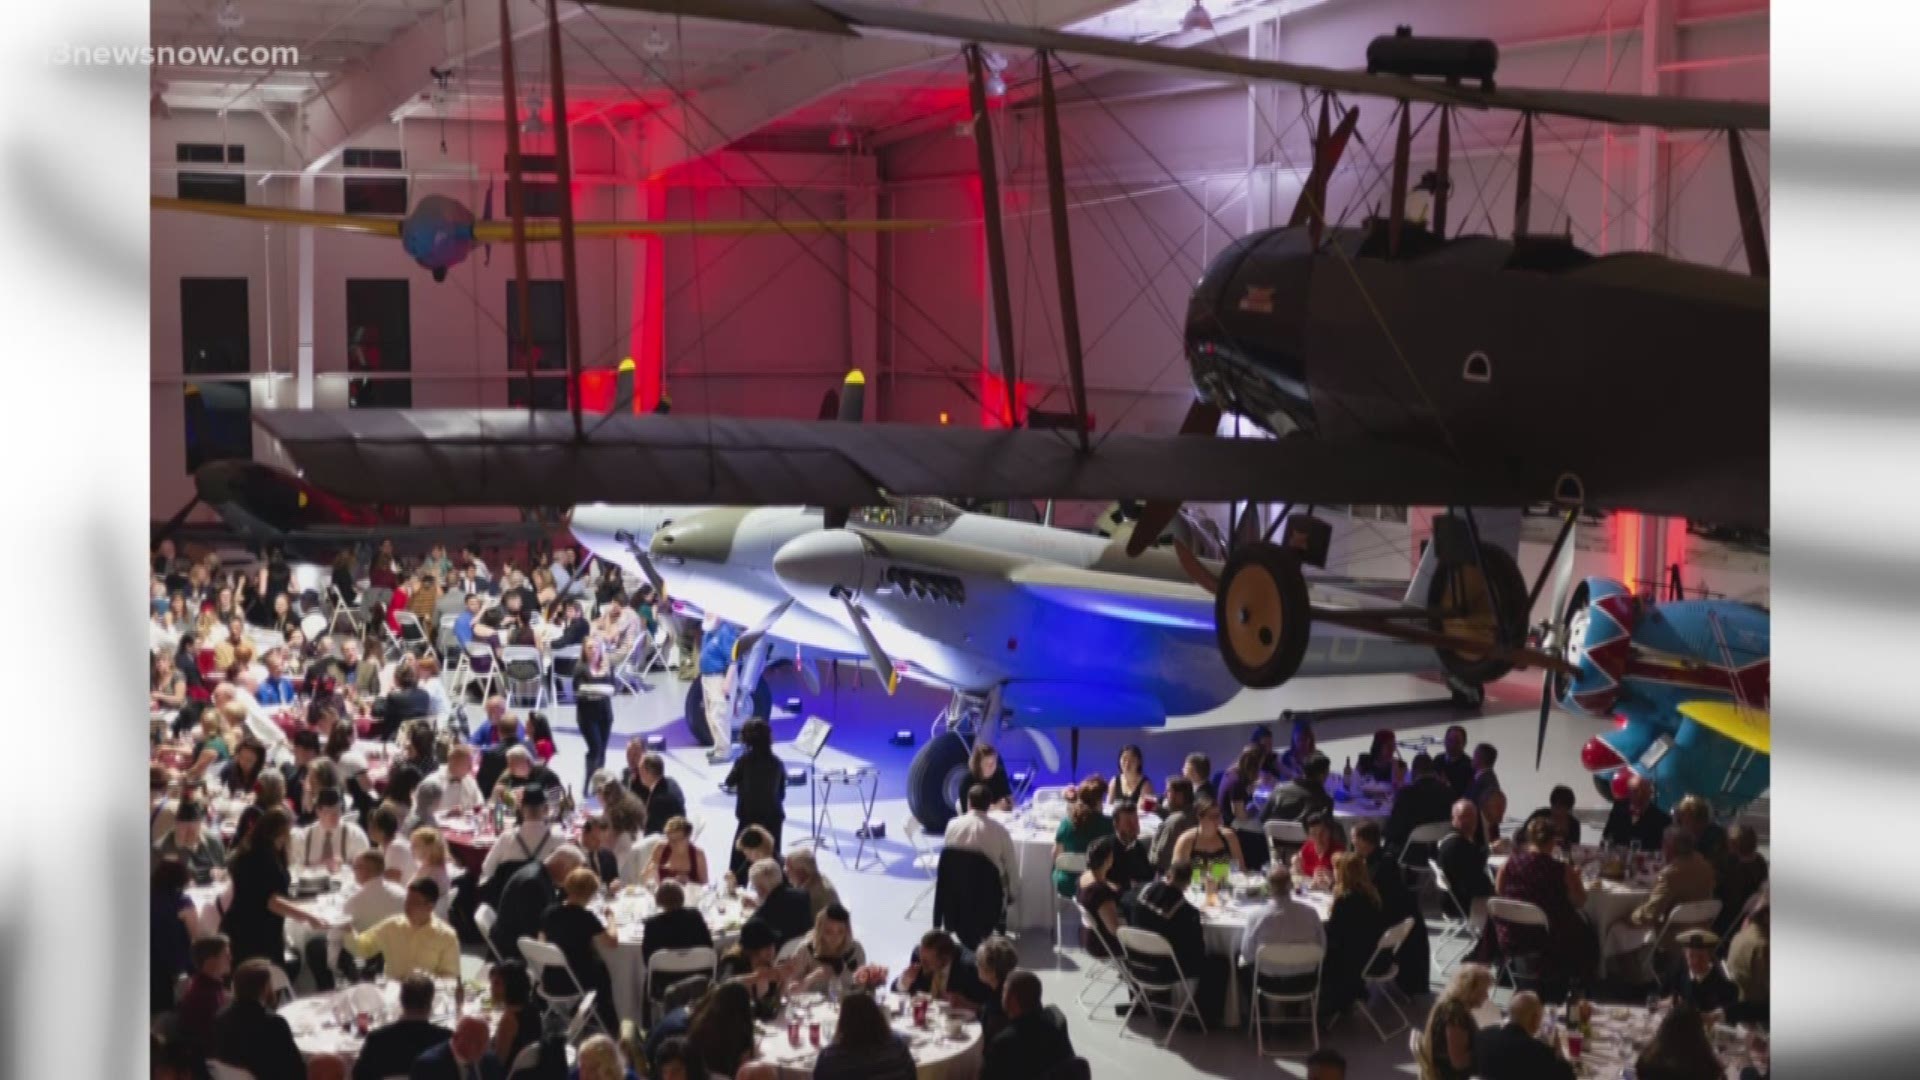 The Military Aviation Museum's Big Band Hangar Dance is next Saturday, just in time for Valentine's Day.